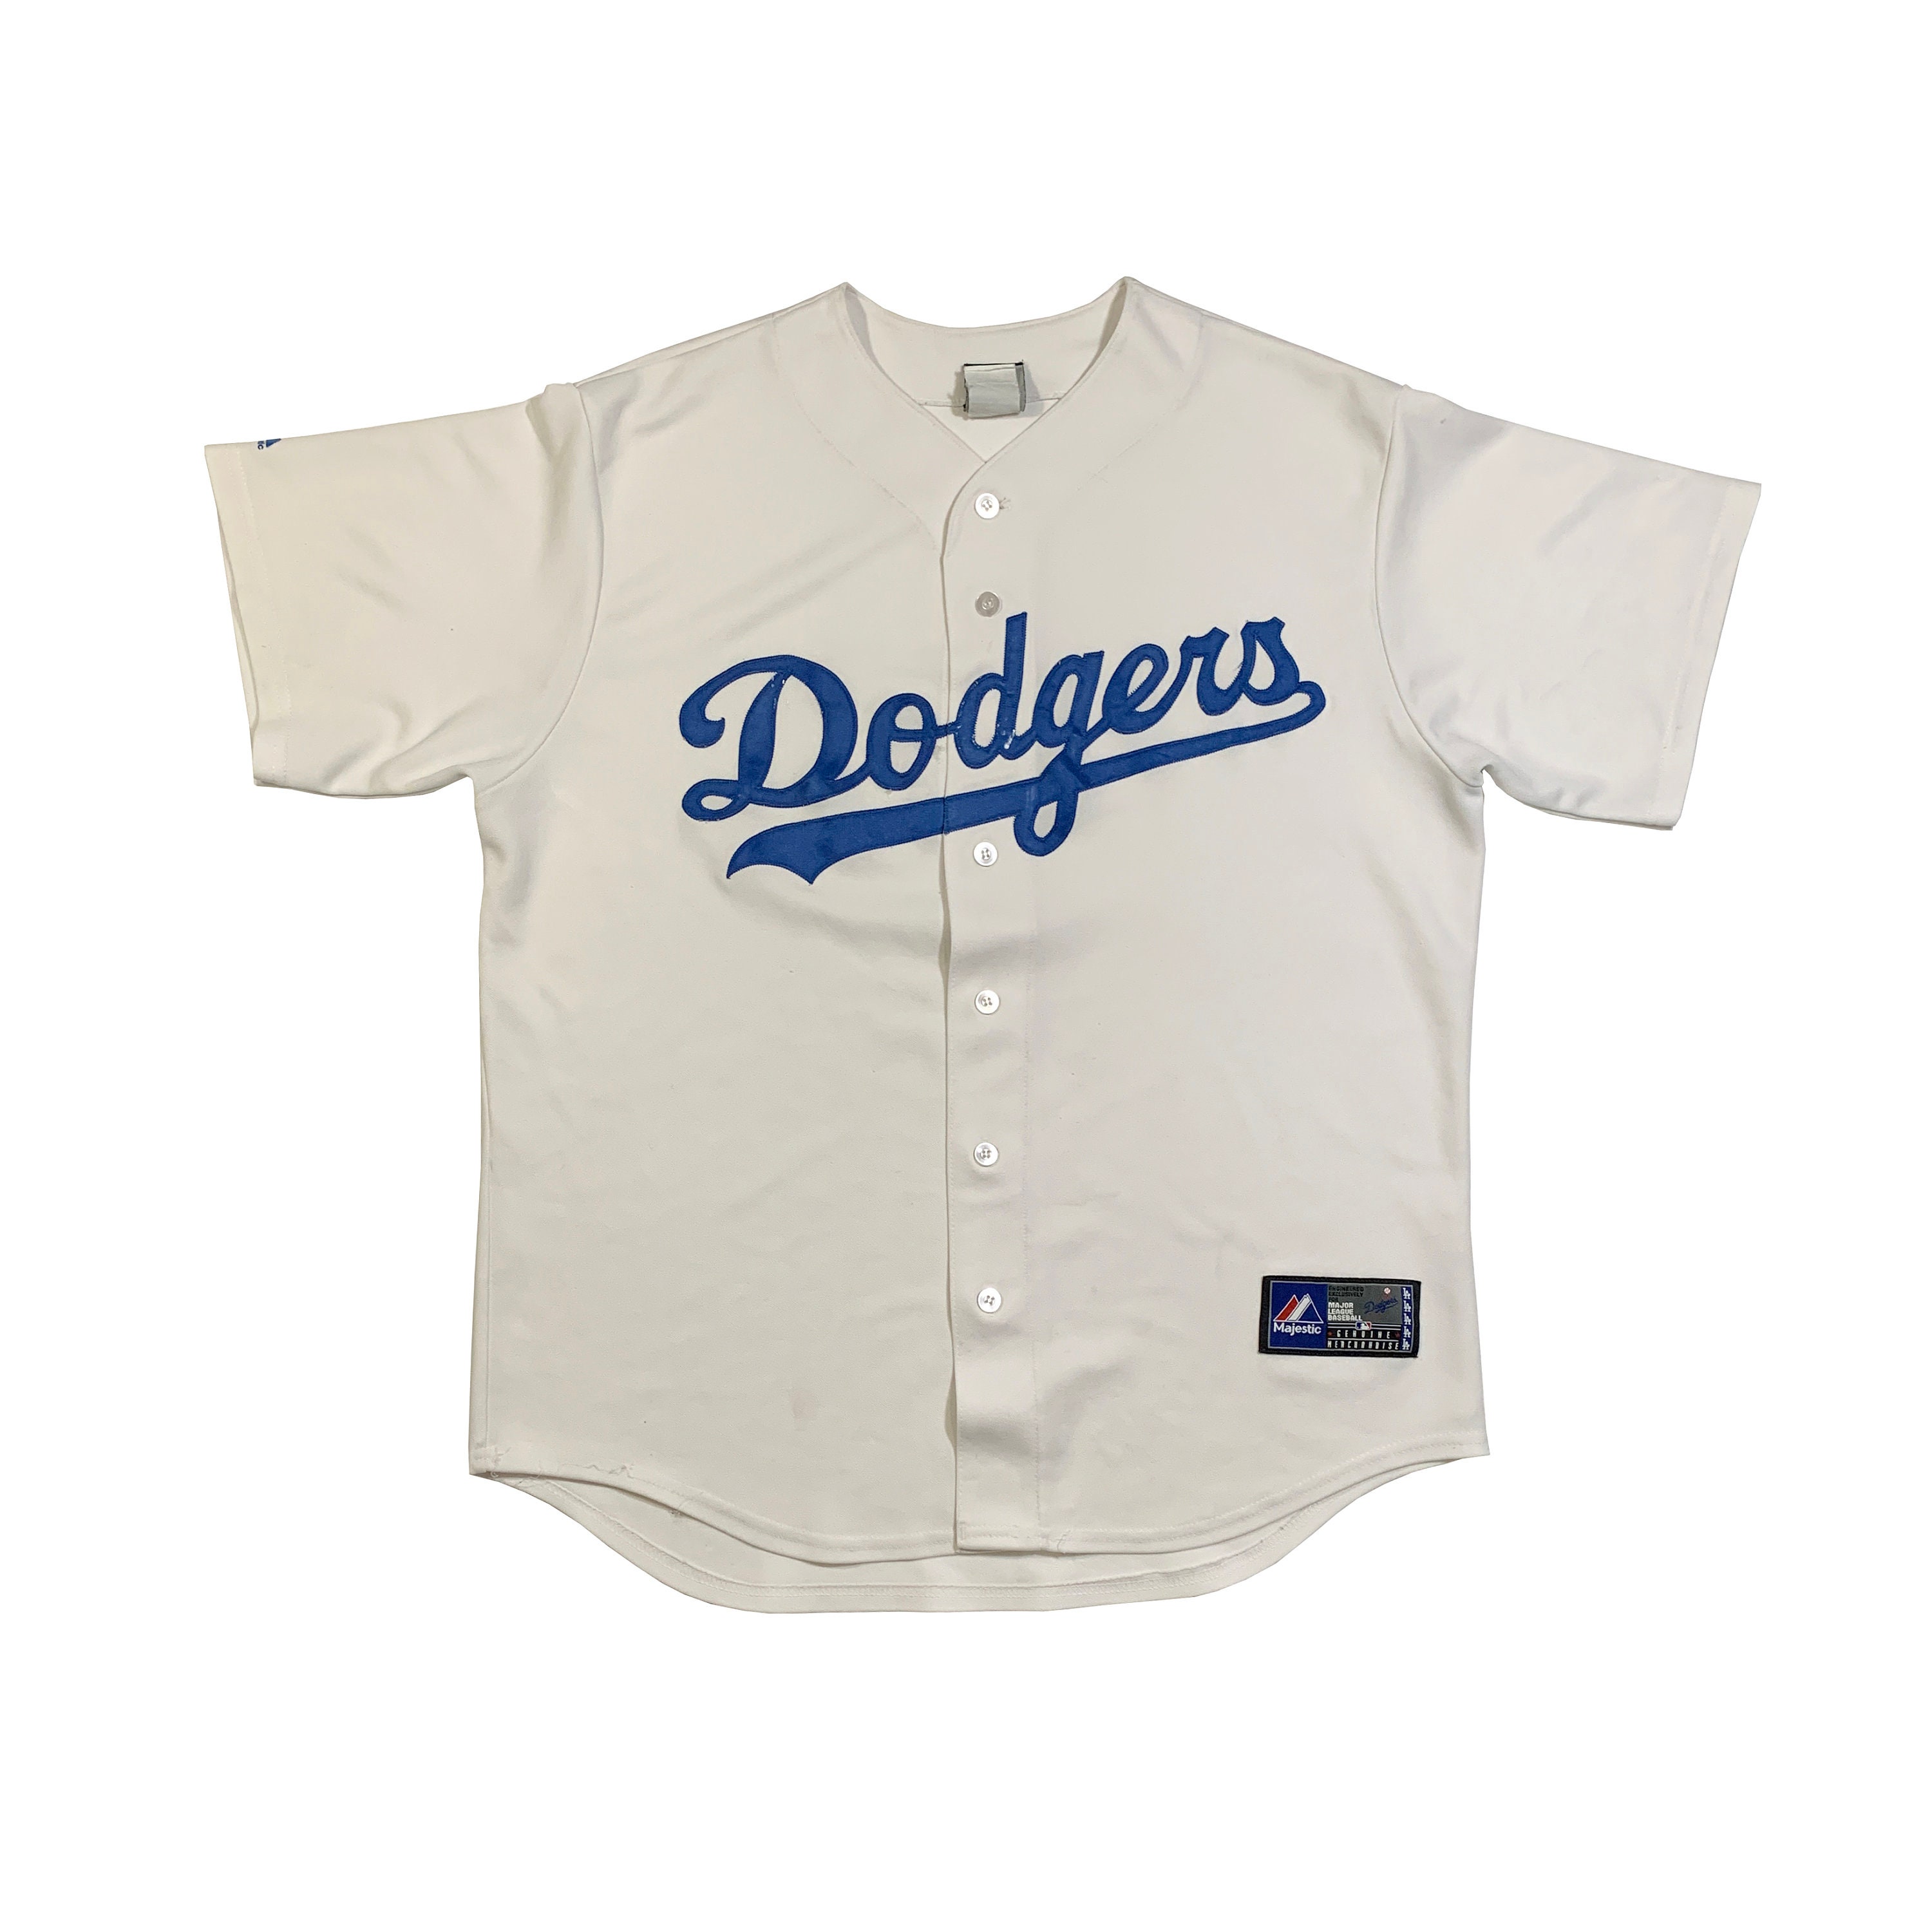 Fan Made No #22 Angeles Dodgers Bad Bunny Baseball Jersey Vintage Small-2xl